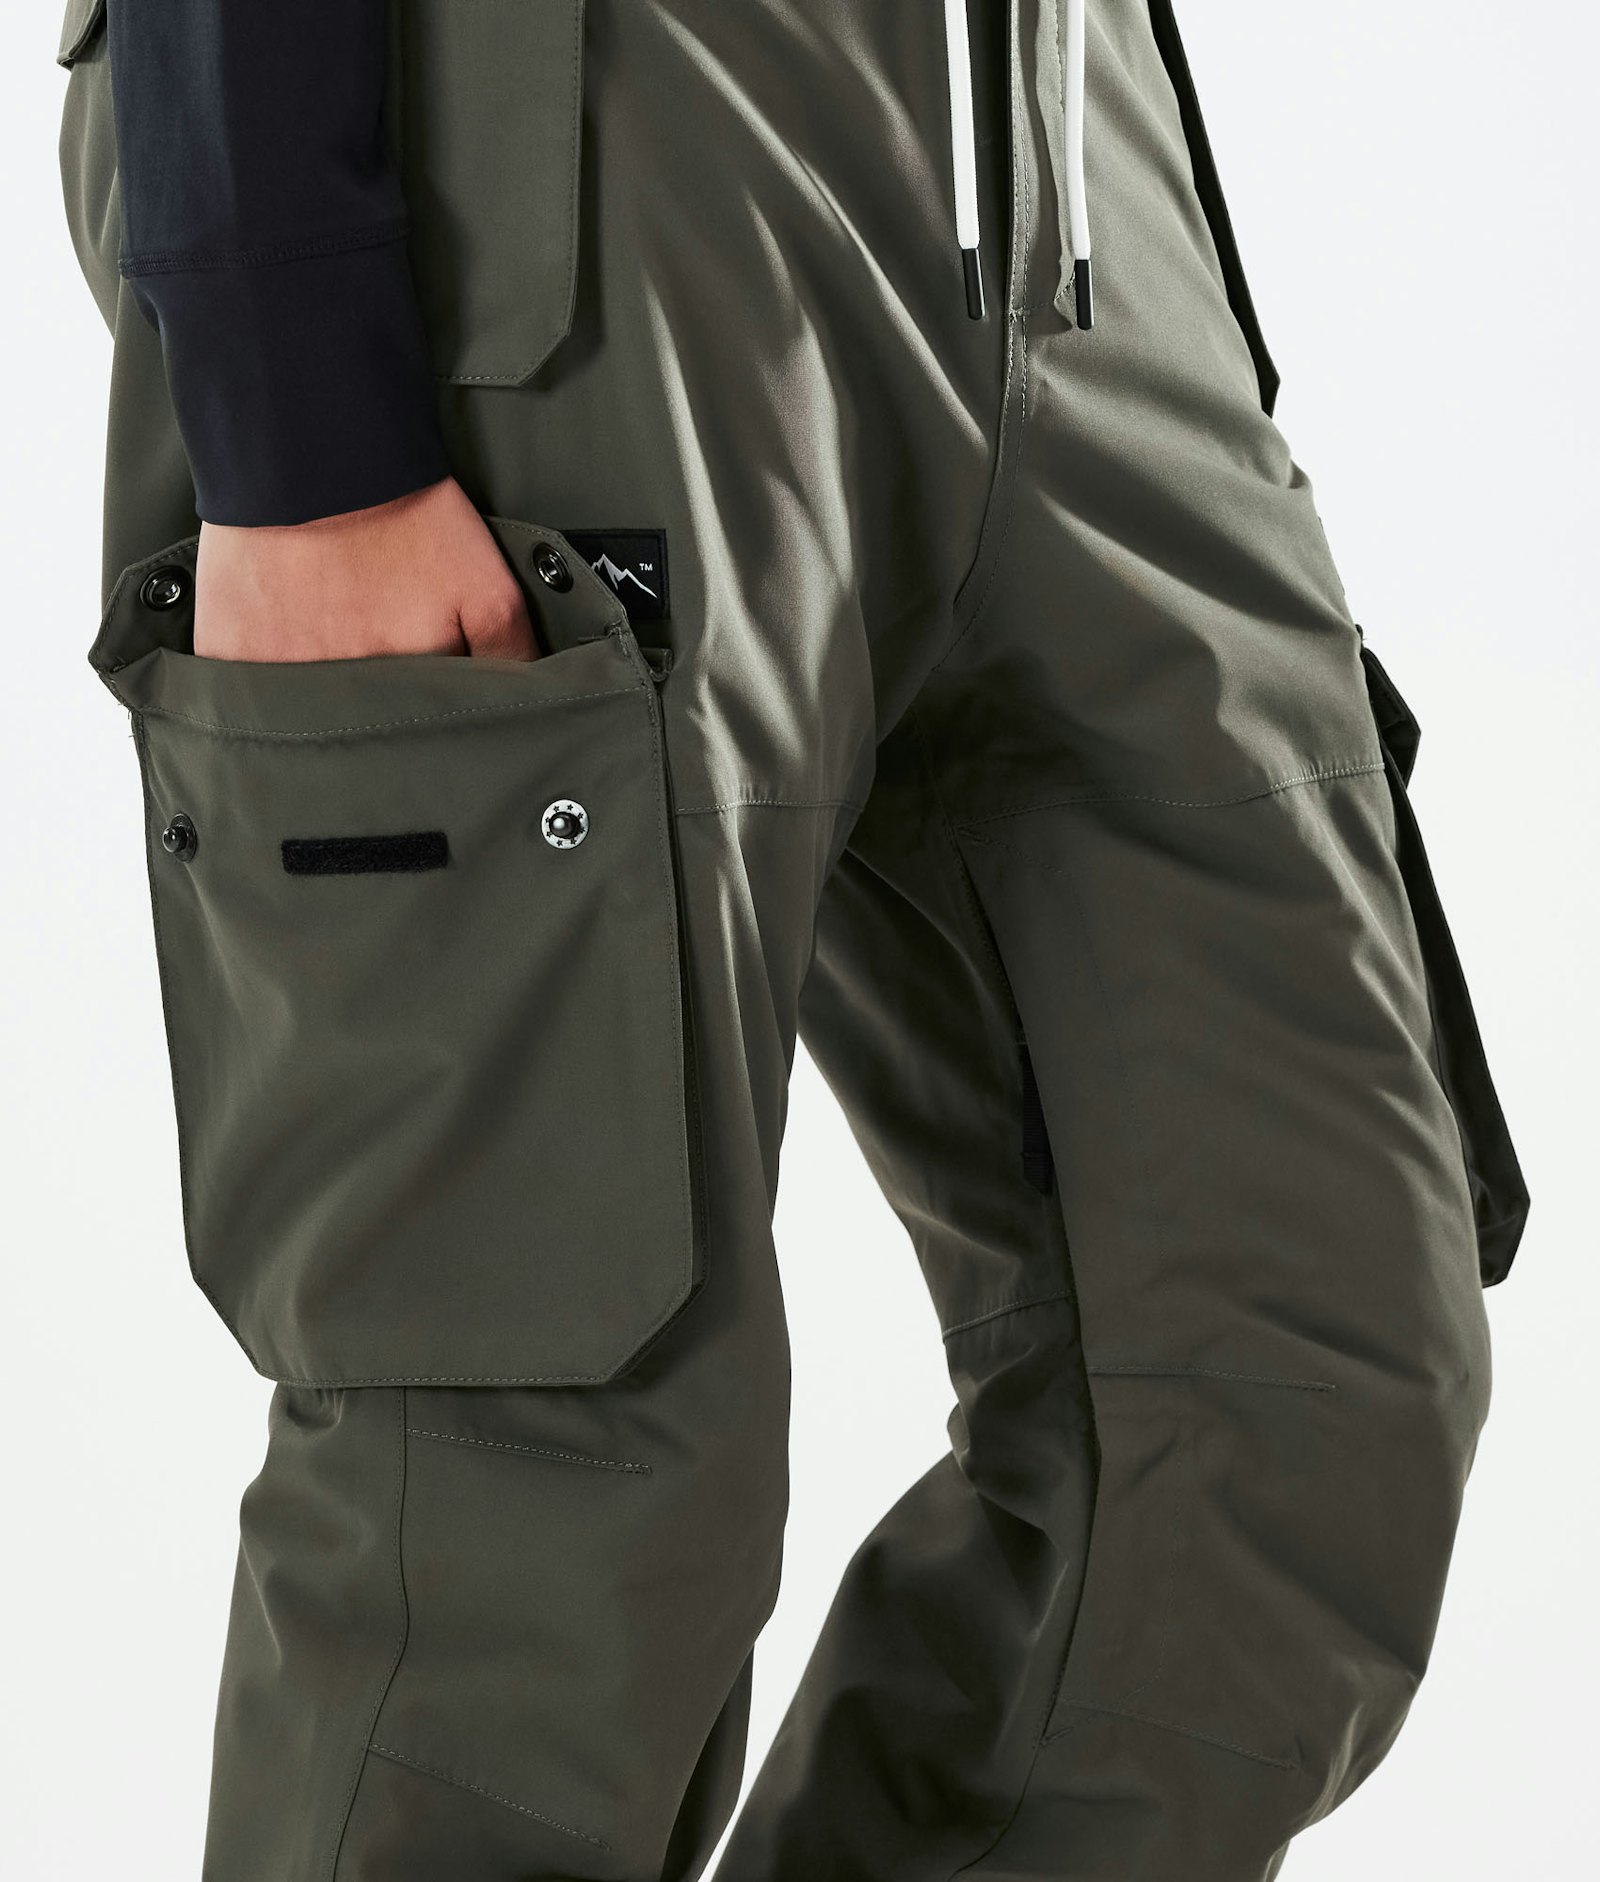 Dope Iconic W 2021 Snowboard Pants Women Olive Green, Image 5 of 6